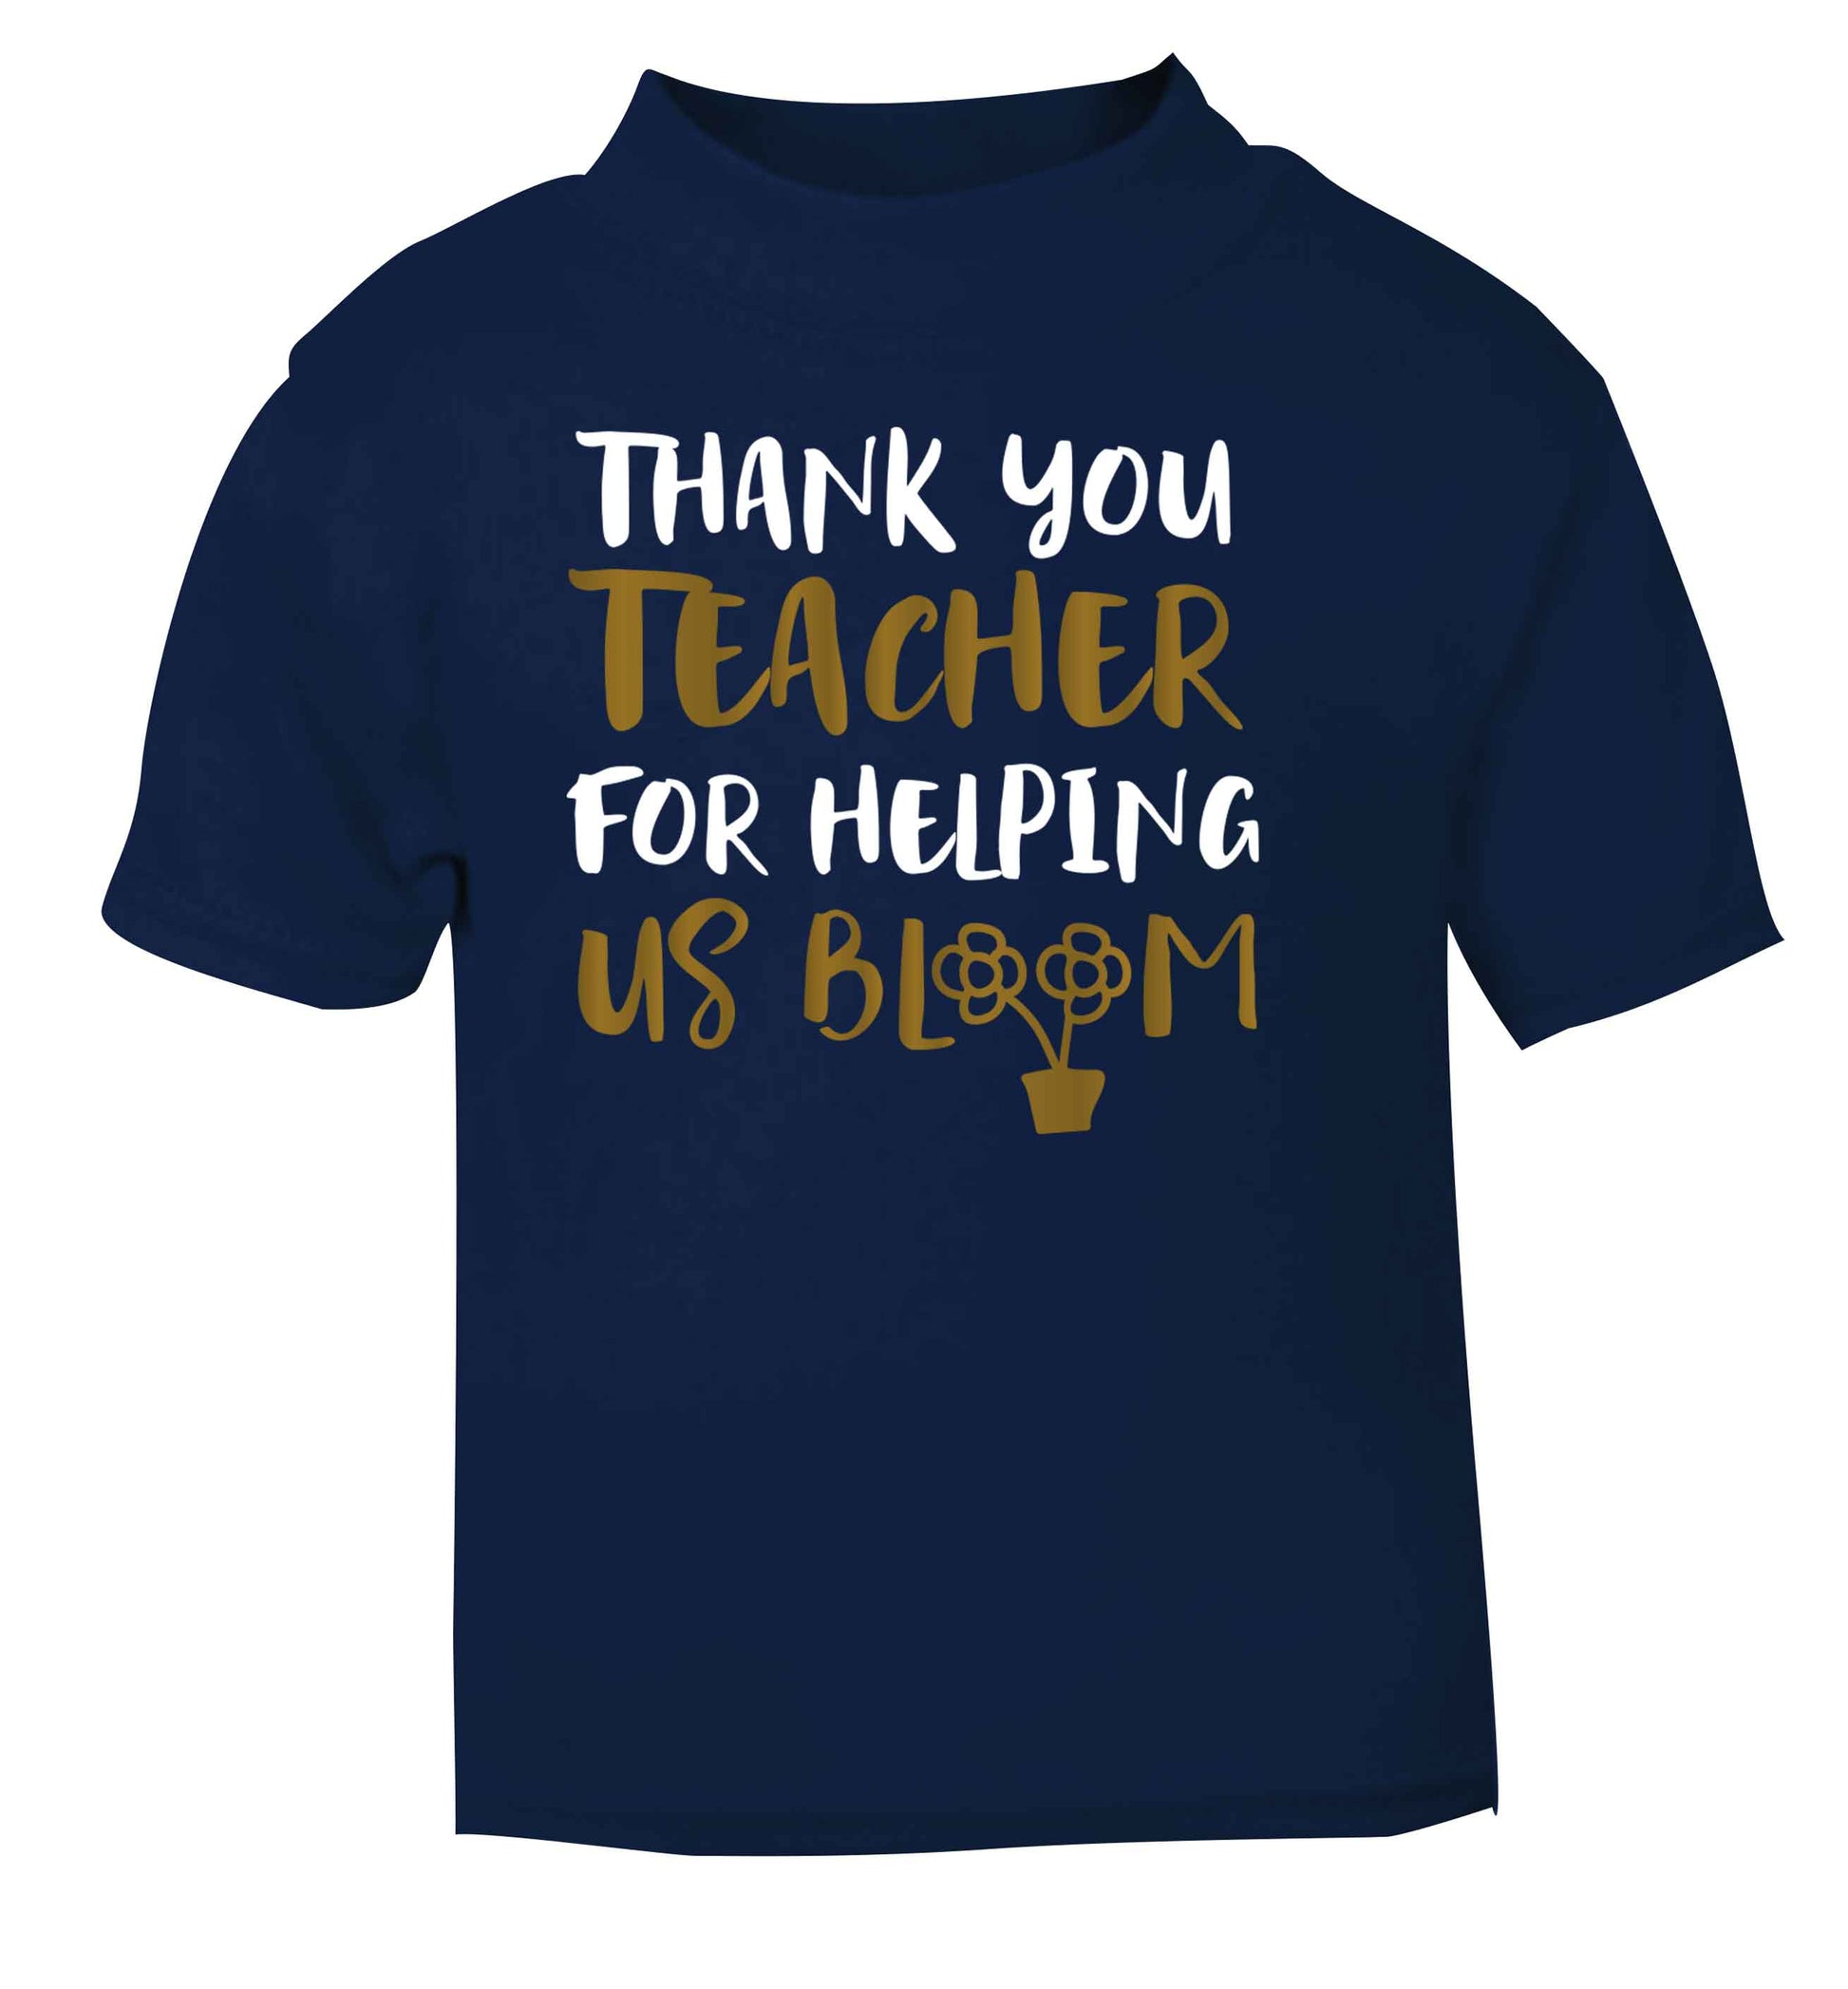 Thank you teacher for helping us bloom navy Baby Toddler Tshirt 2 Years